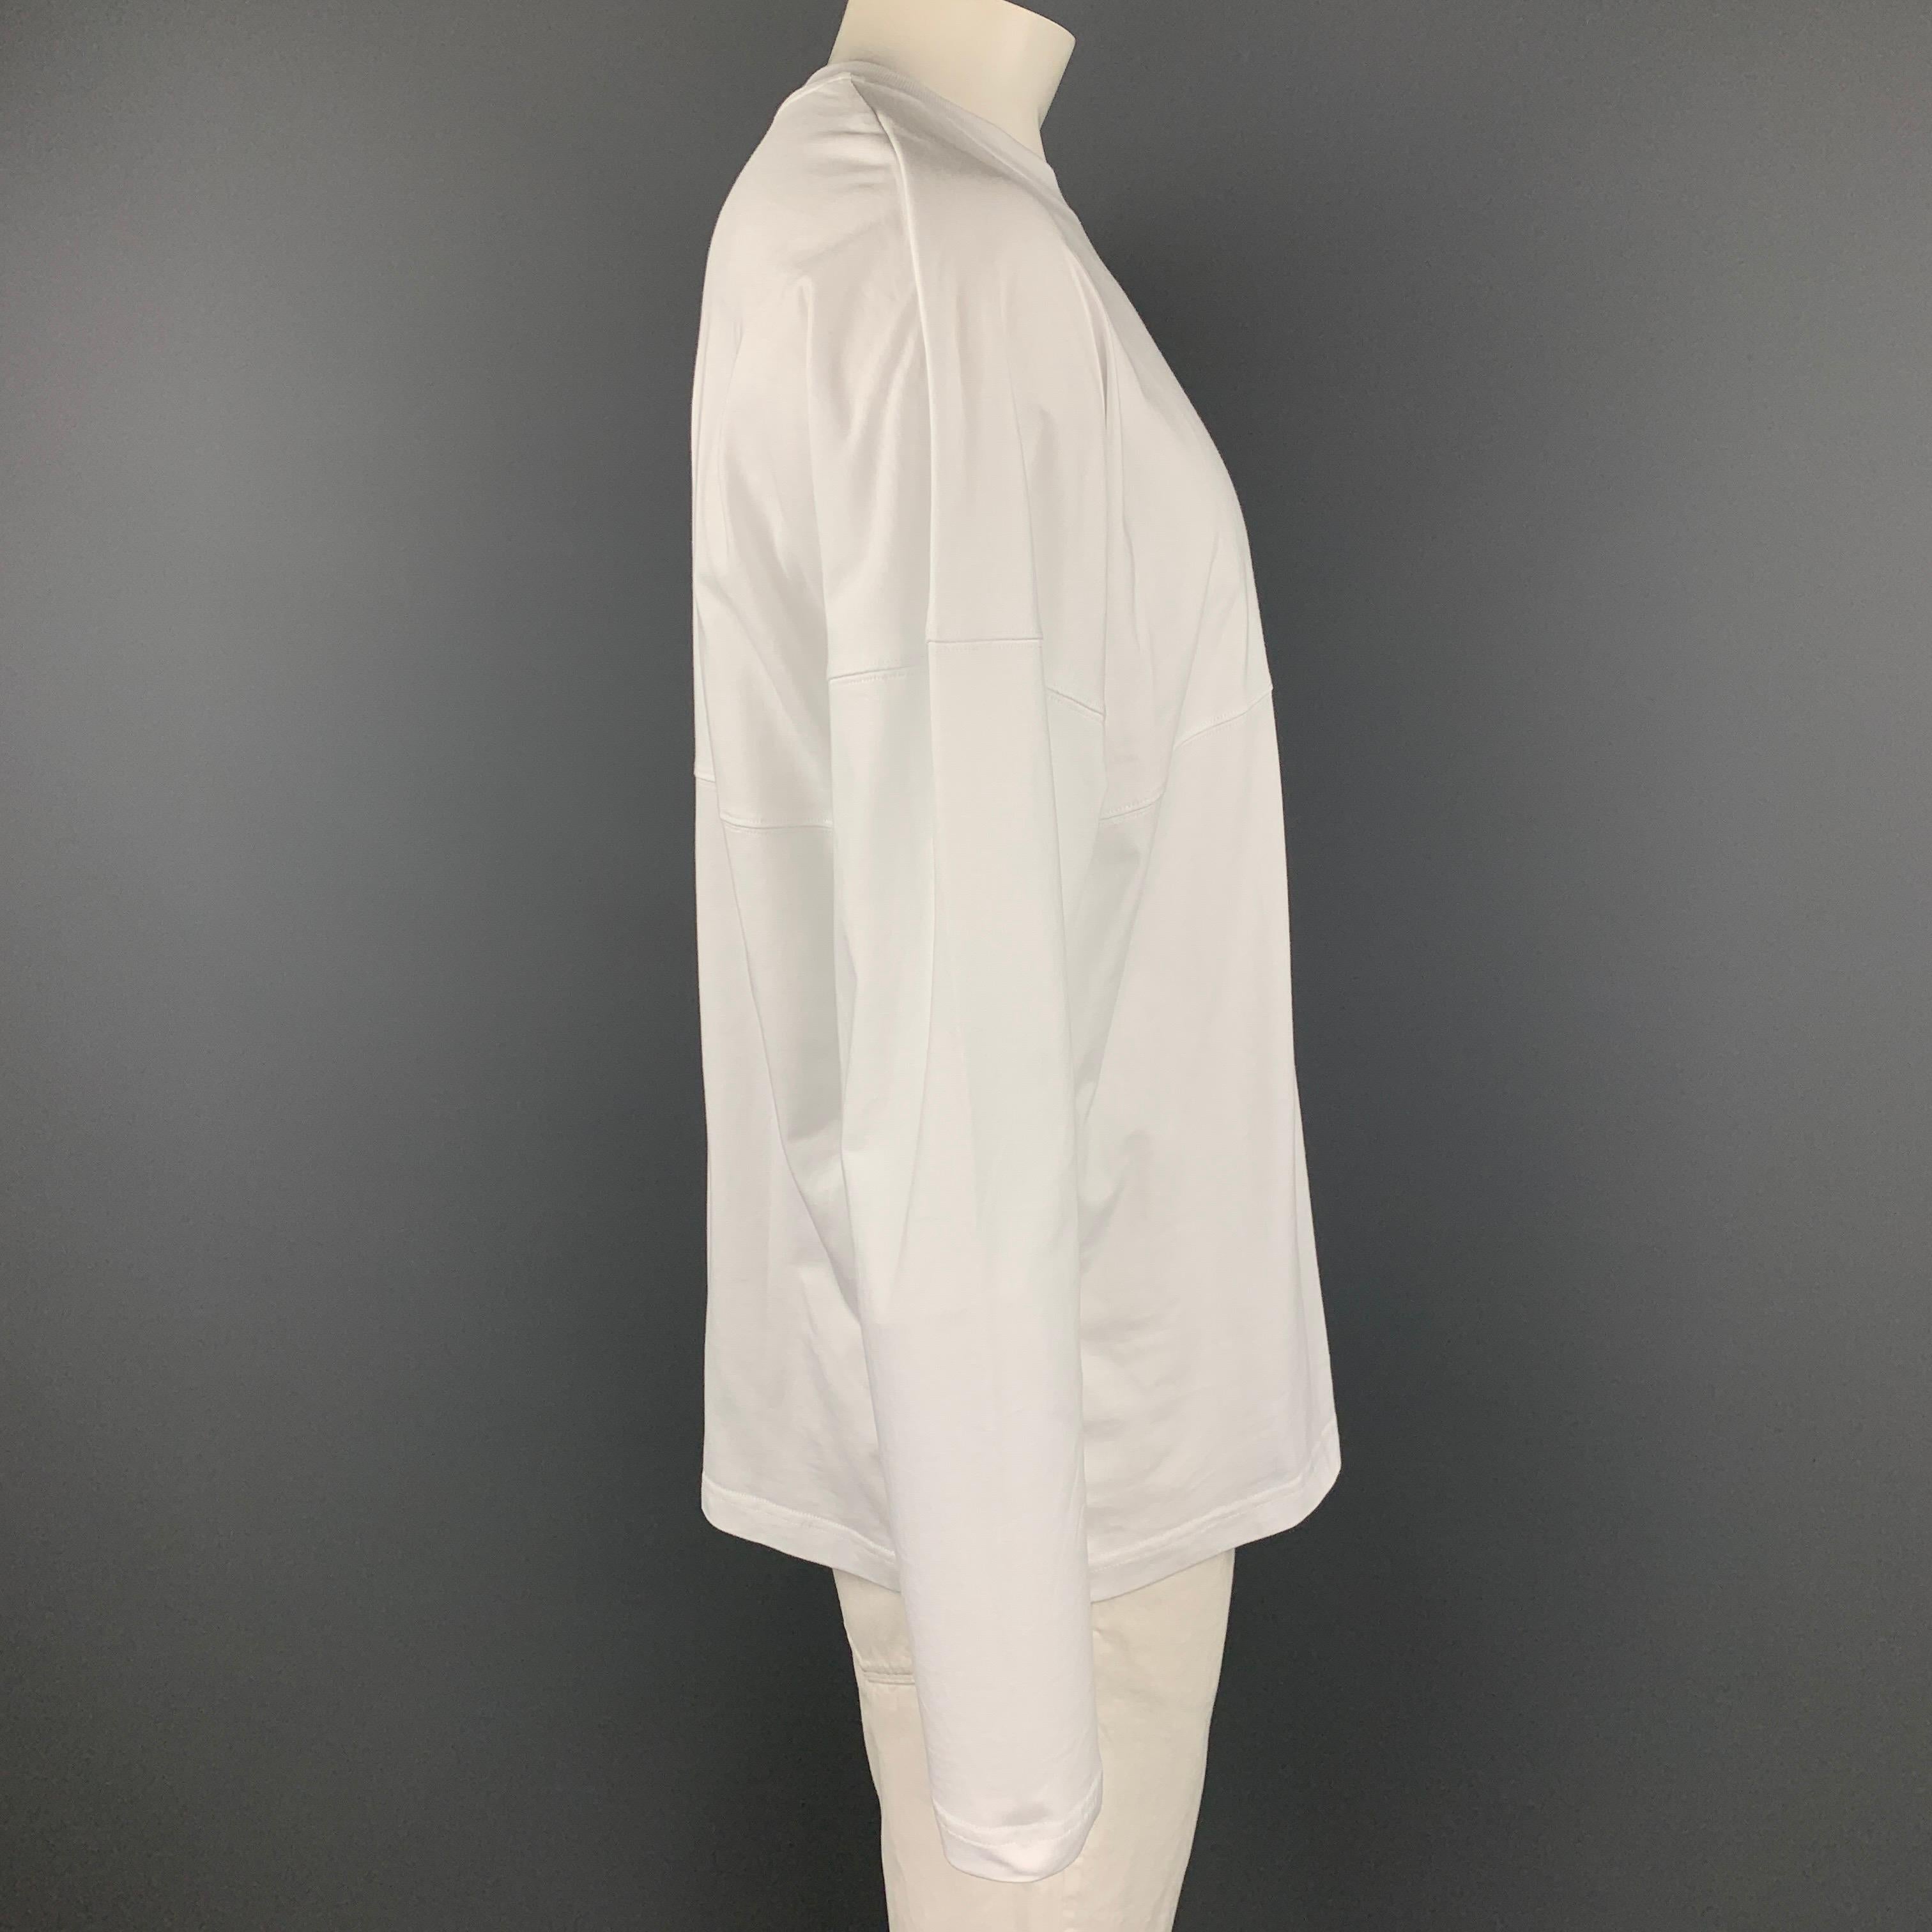 MONCLER long sleeve t-shirt comes in a white cotton with a logo patch detail featuring a crew-neck. 

New With Tags.
Marked: L

Measurements:

Shoulder: 32 in.
Chest: 52 in.
Sleeve: 21.5 in.
Length: 28 in. 